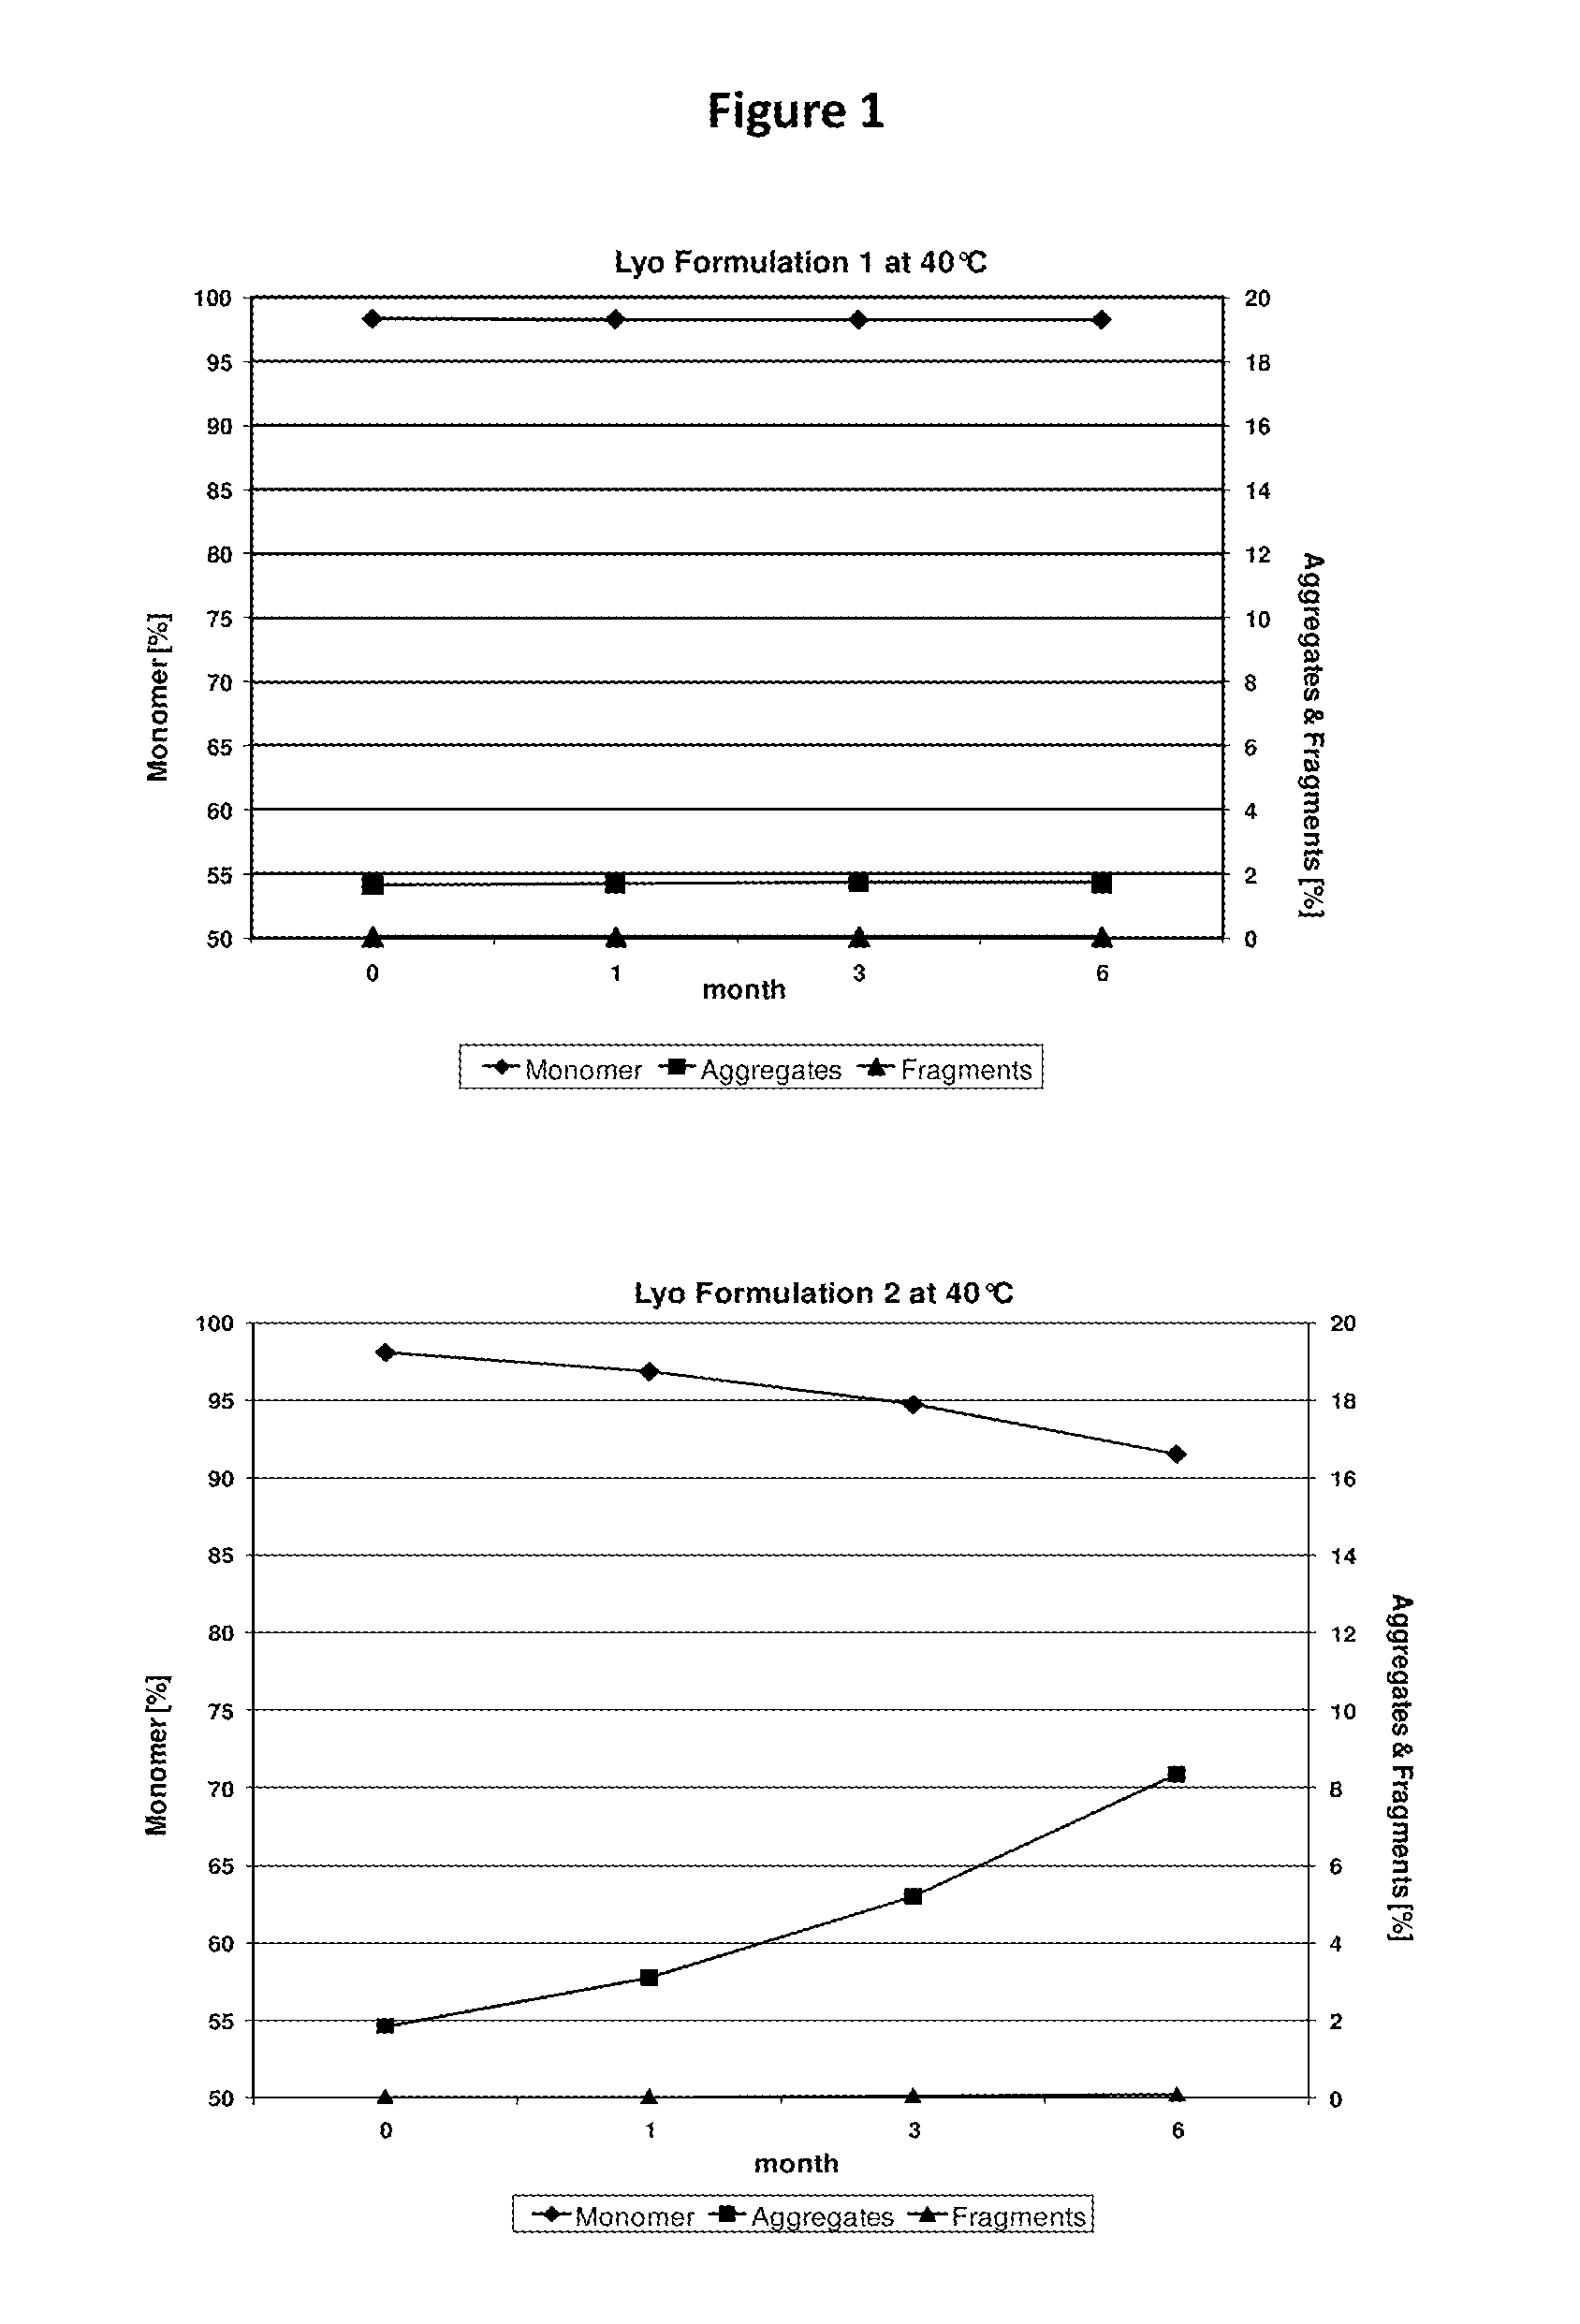 Anti-nerve growth factor (NGF) antibody compositions